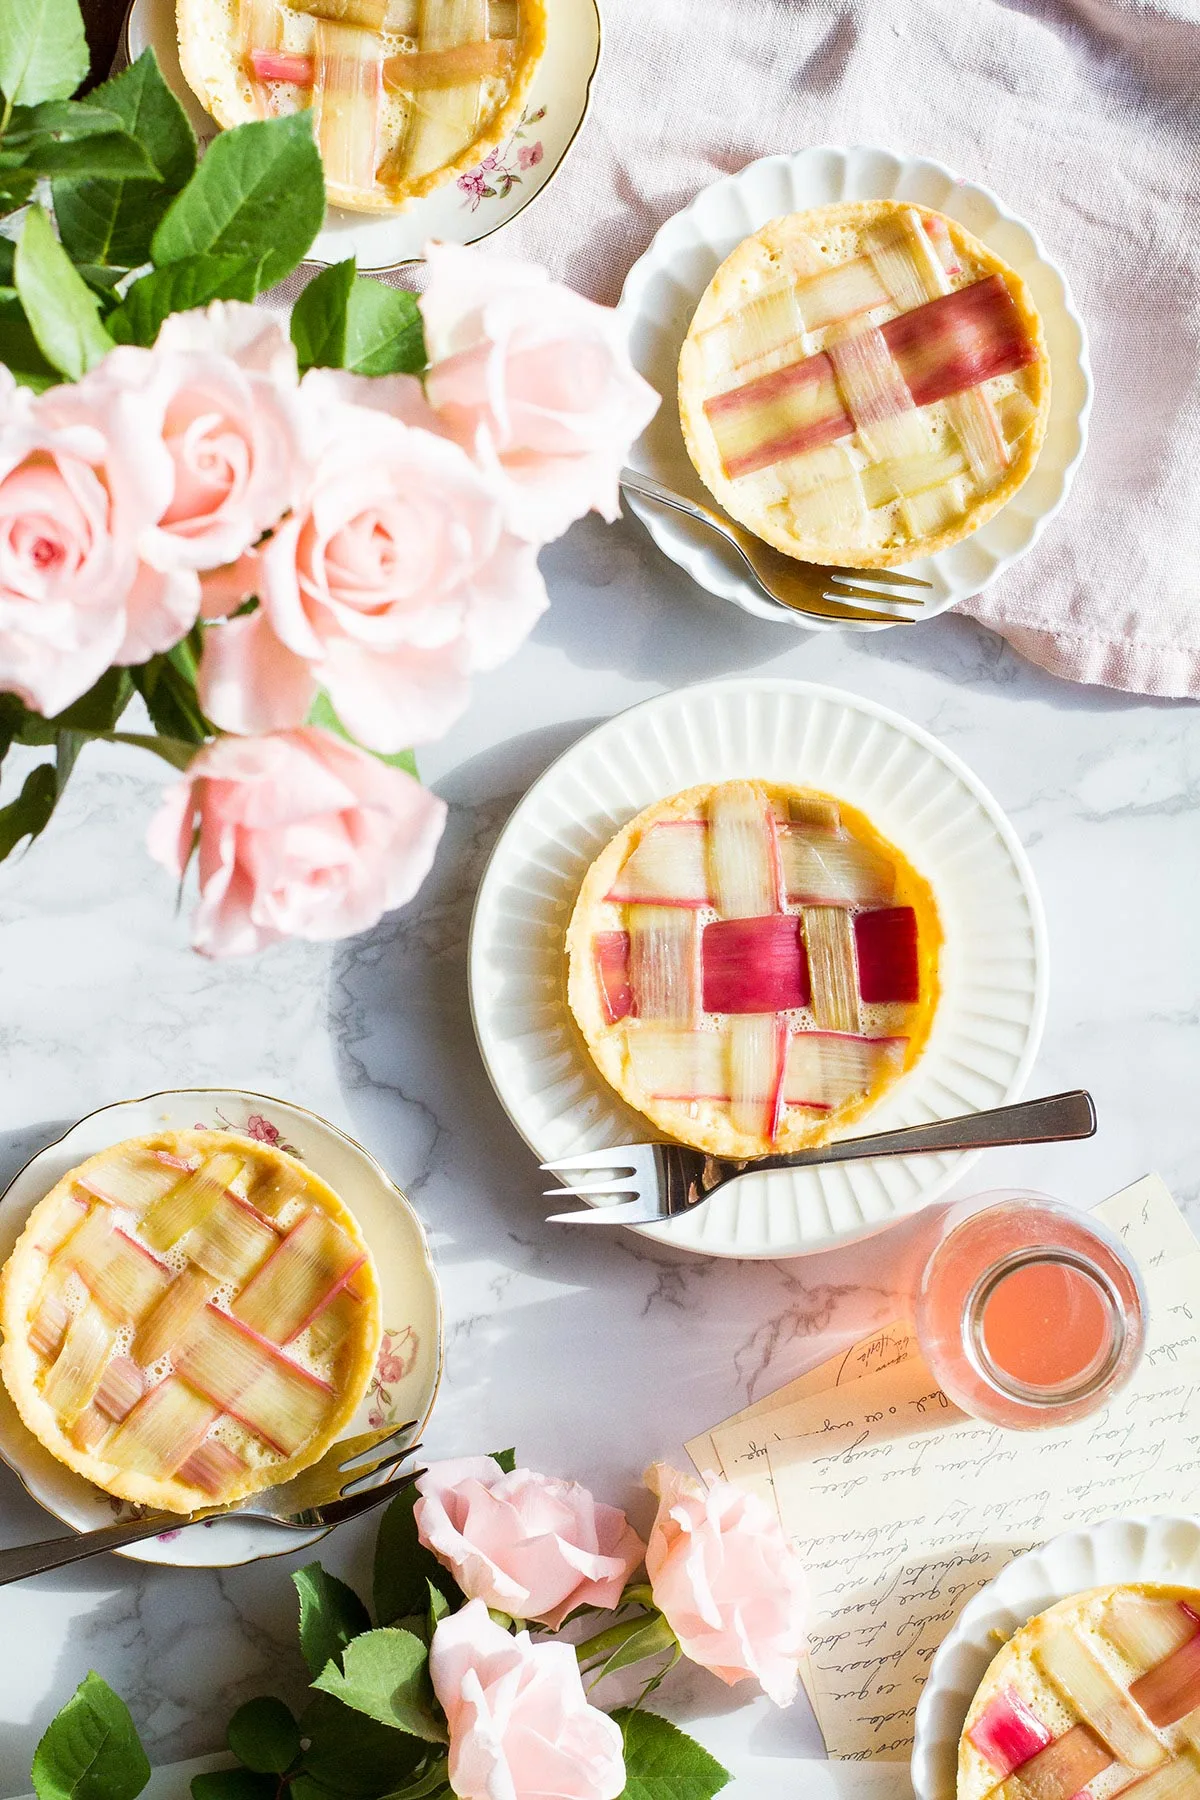 Five tarts with rhubarb on top shaped in a lattice pattern.